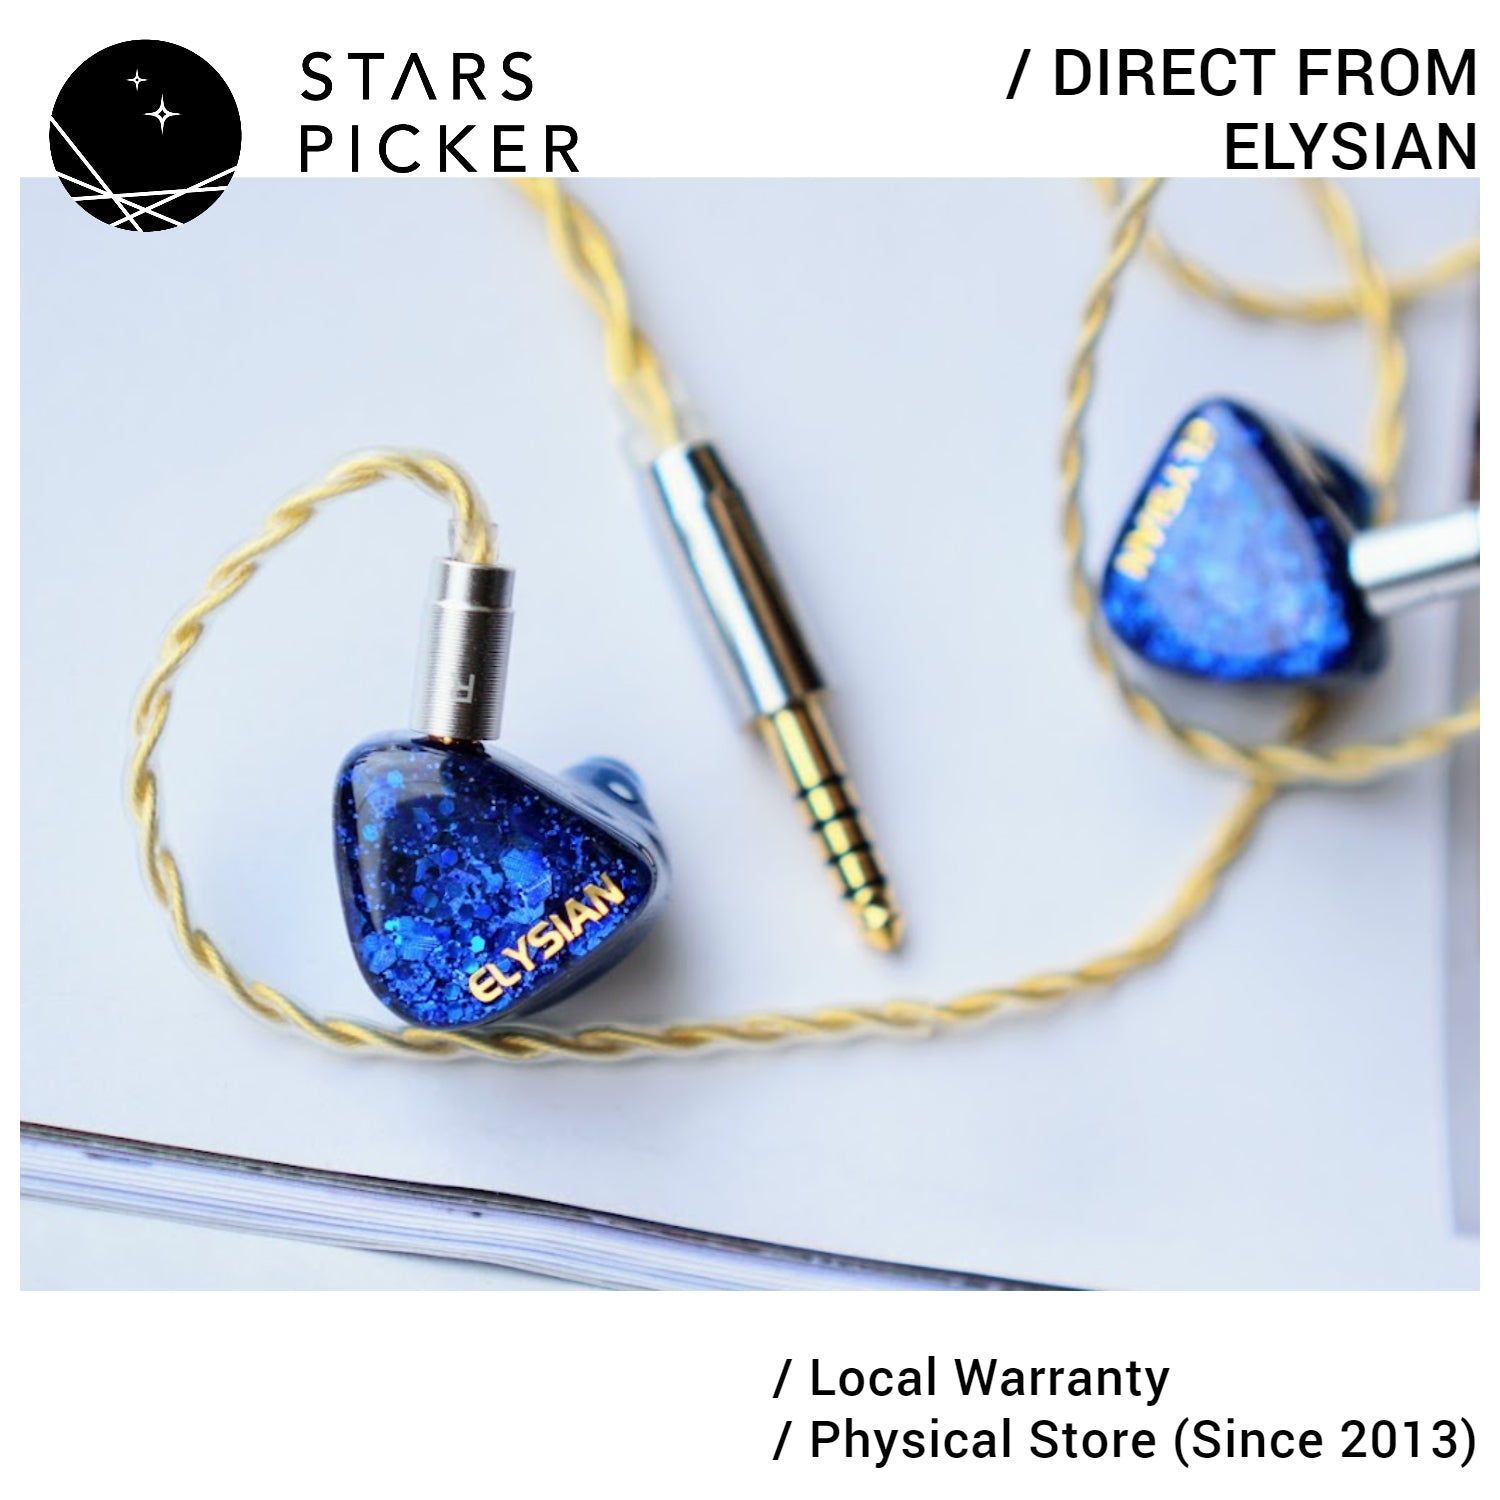 Elysian Acoustic Labs DIVA (new 2023 ver.) - 6 Drivers Universal IEM In ear monitor Adjustable Tuning Switch Earphone